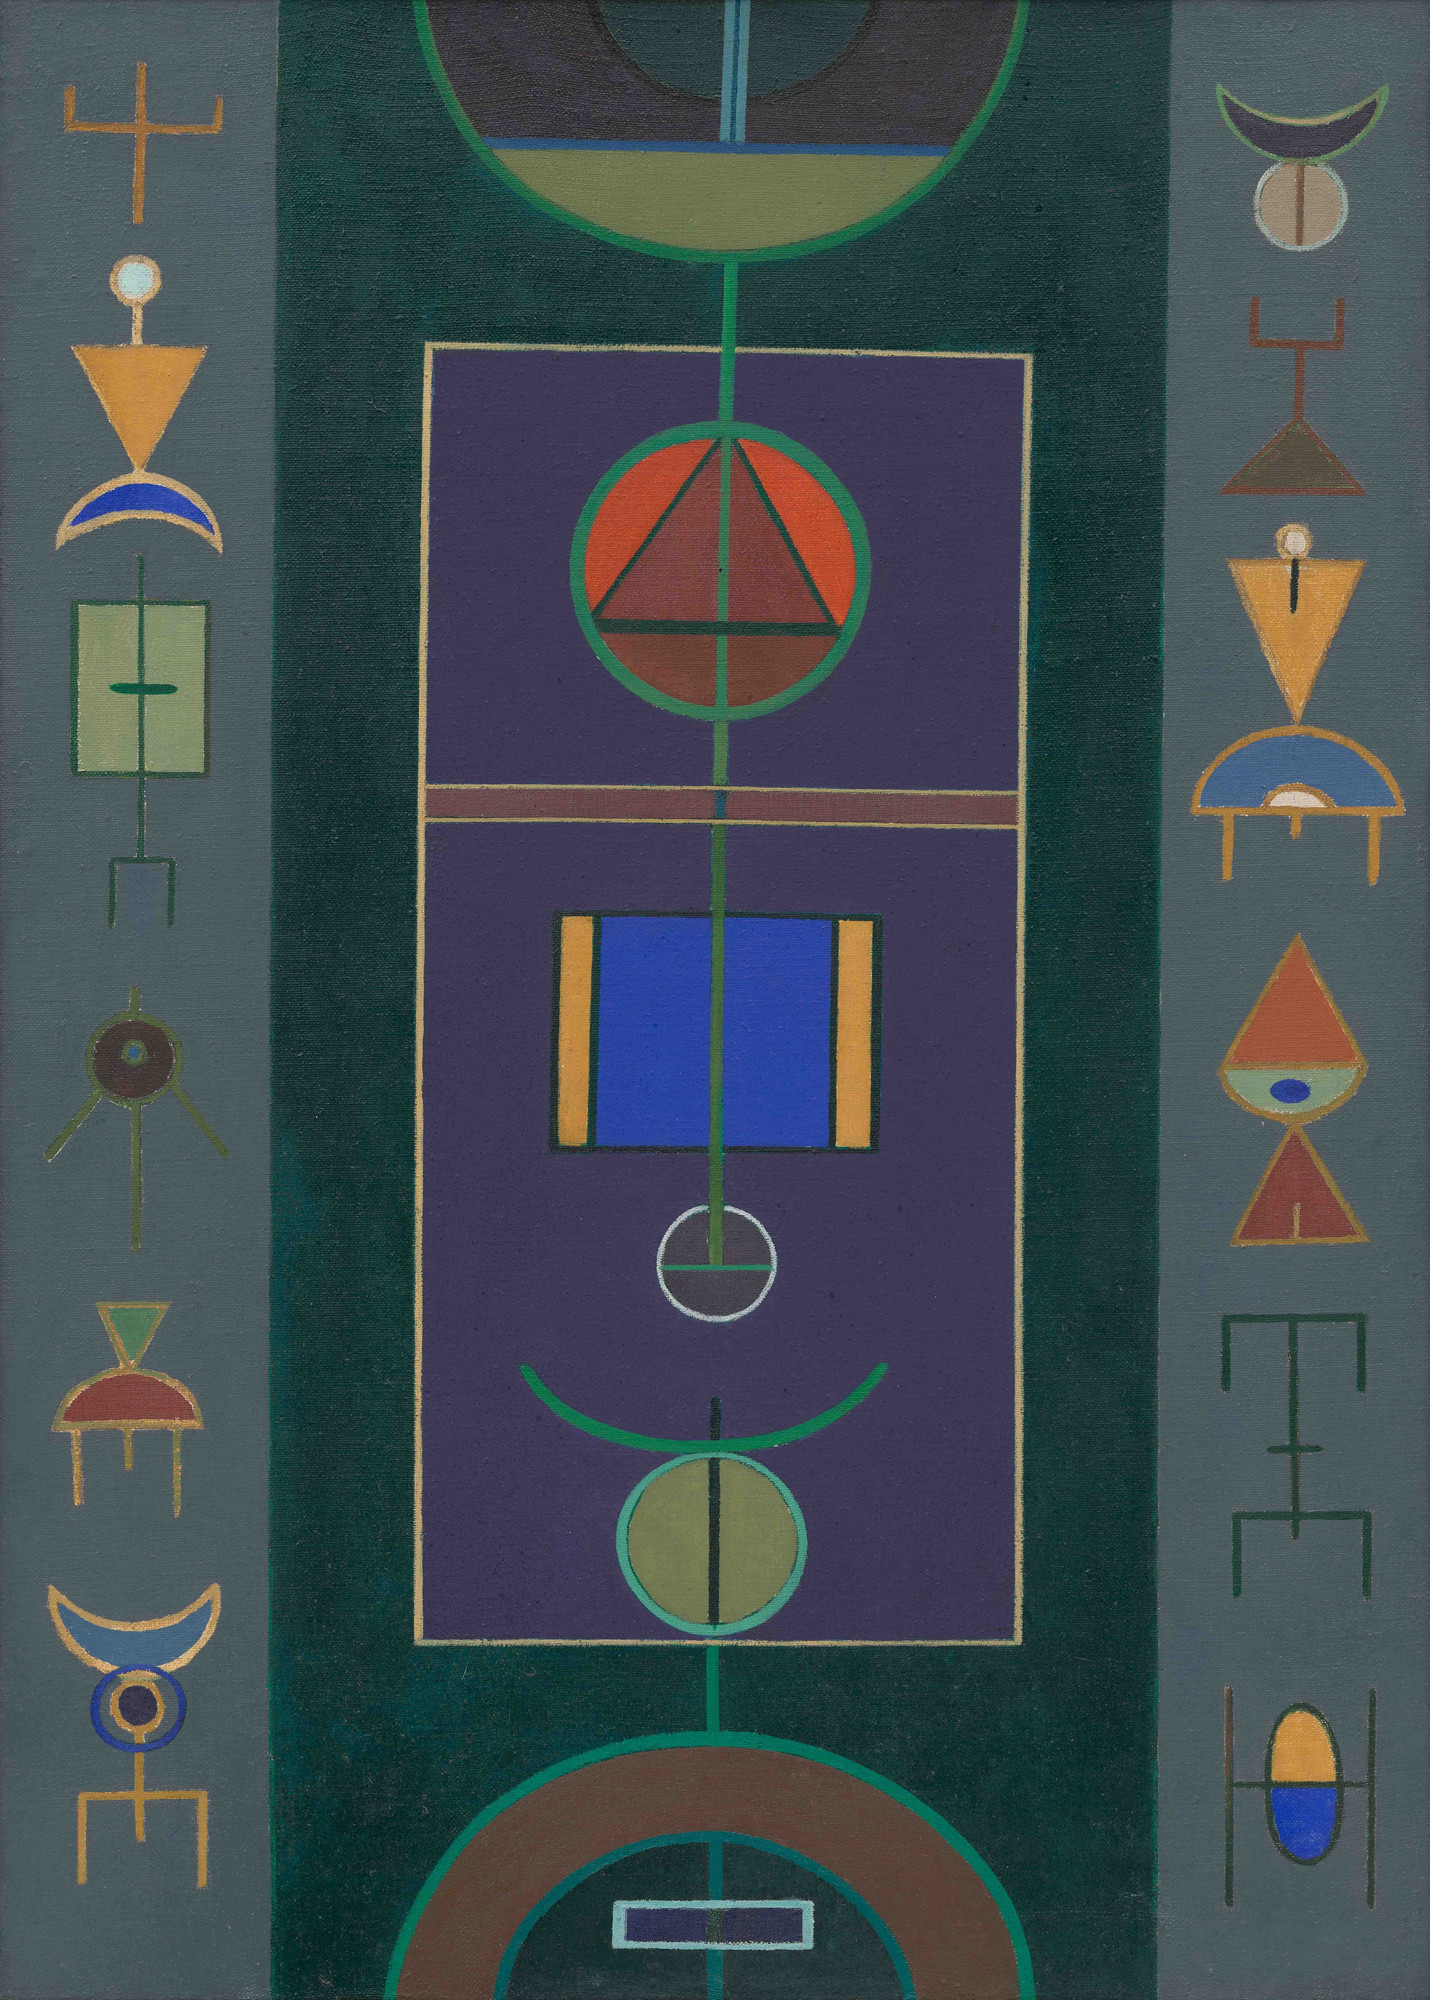 Rubem Valentim. Untitled. 1956-1962. Oil on canvas, 27 5/8 × 19 3/4” (70.2 × 50.2 cm). Gift of Patricia Phelps de Cisneros through the Latin American and Caribbean Fund in honor of Lissette Stancioff